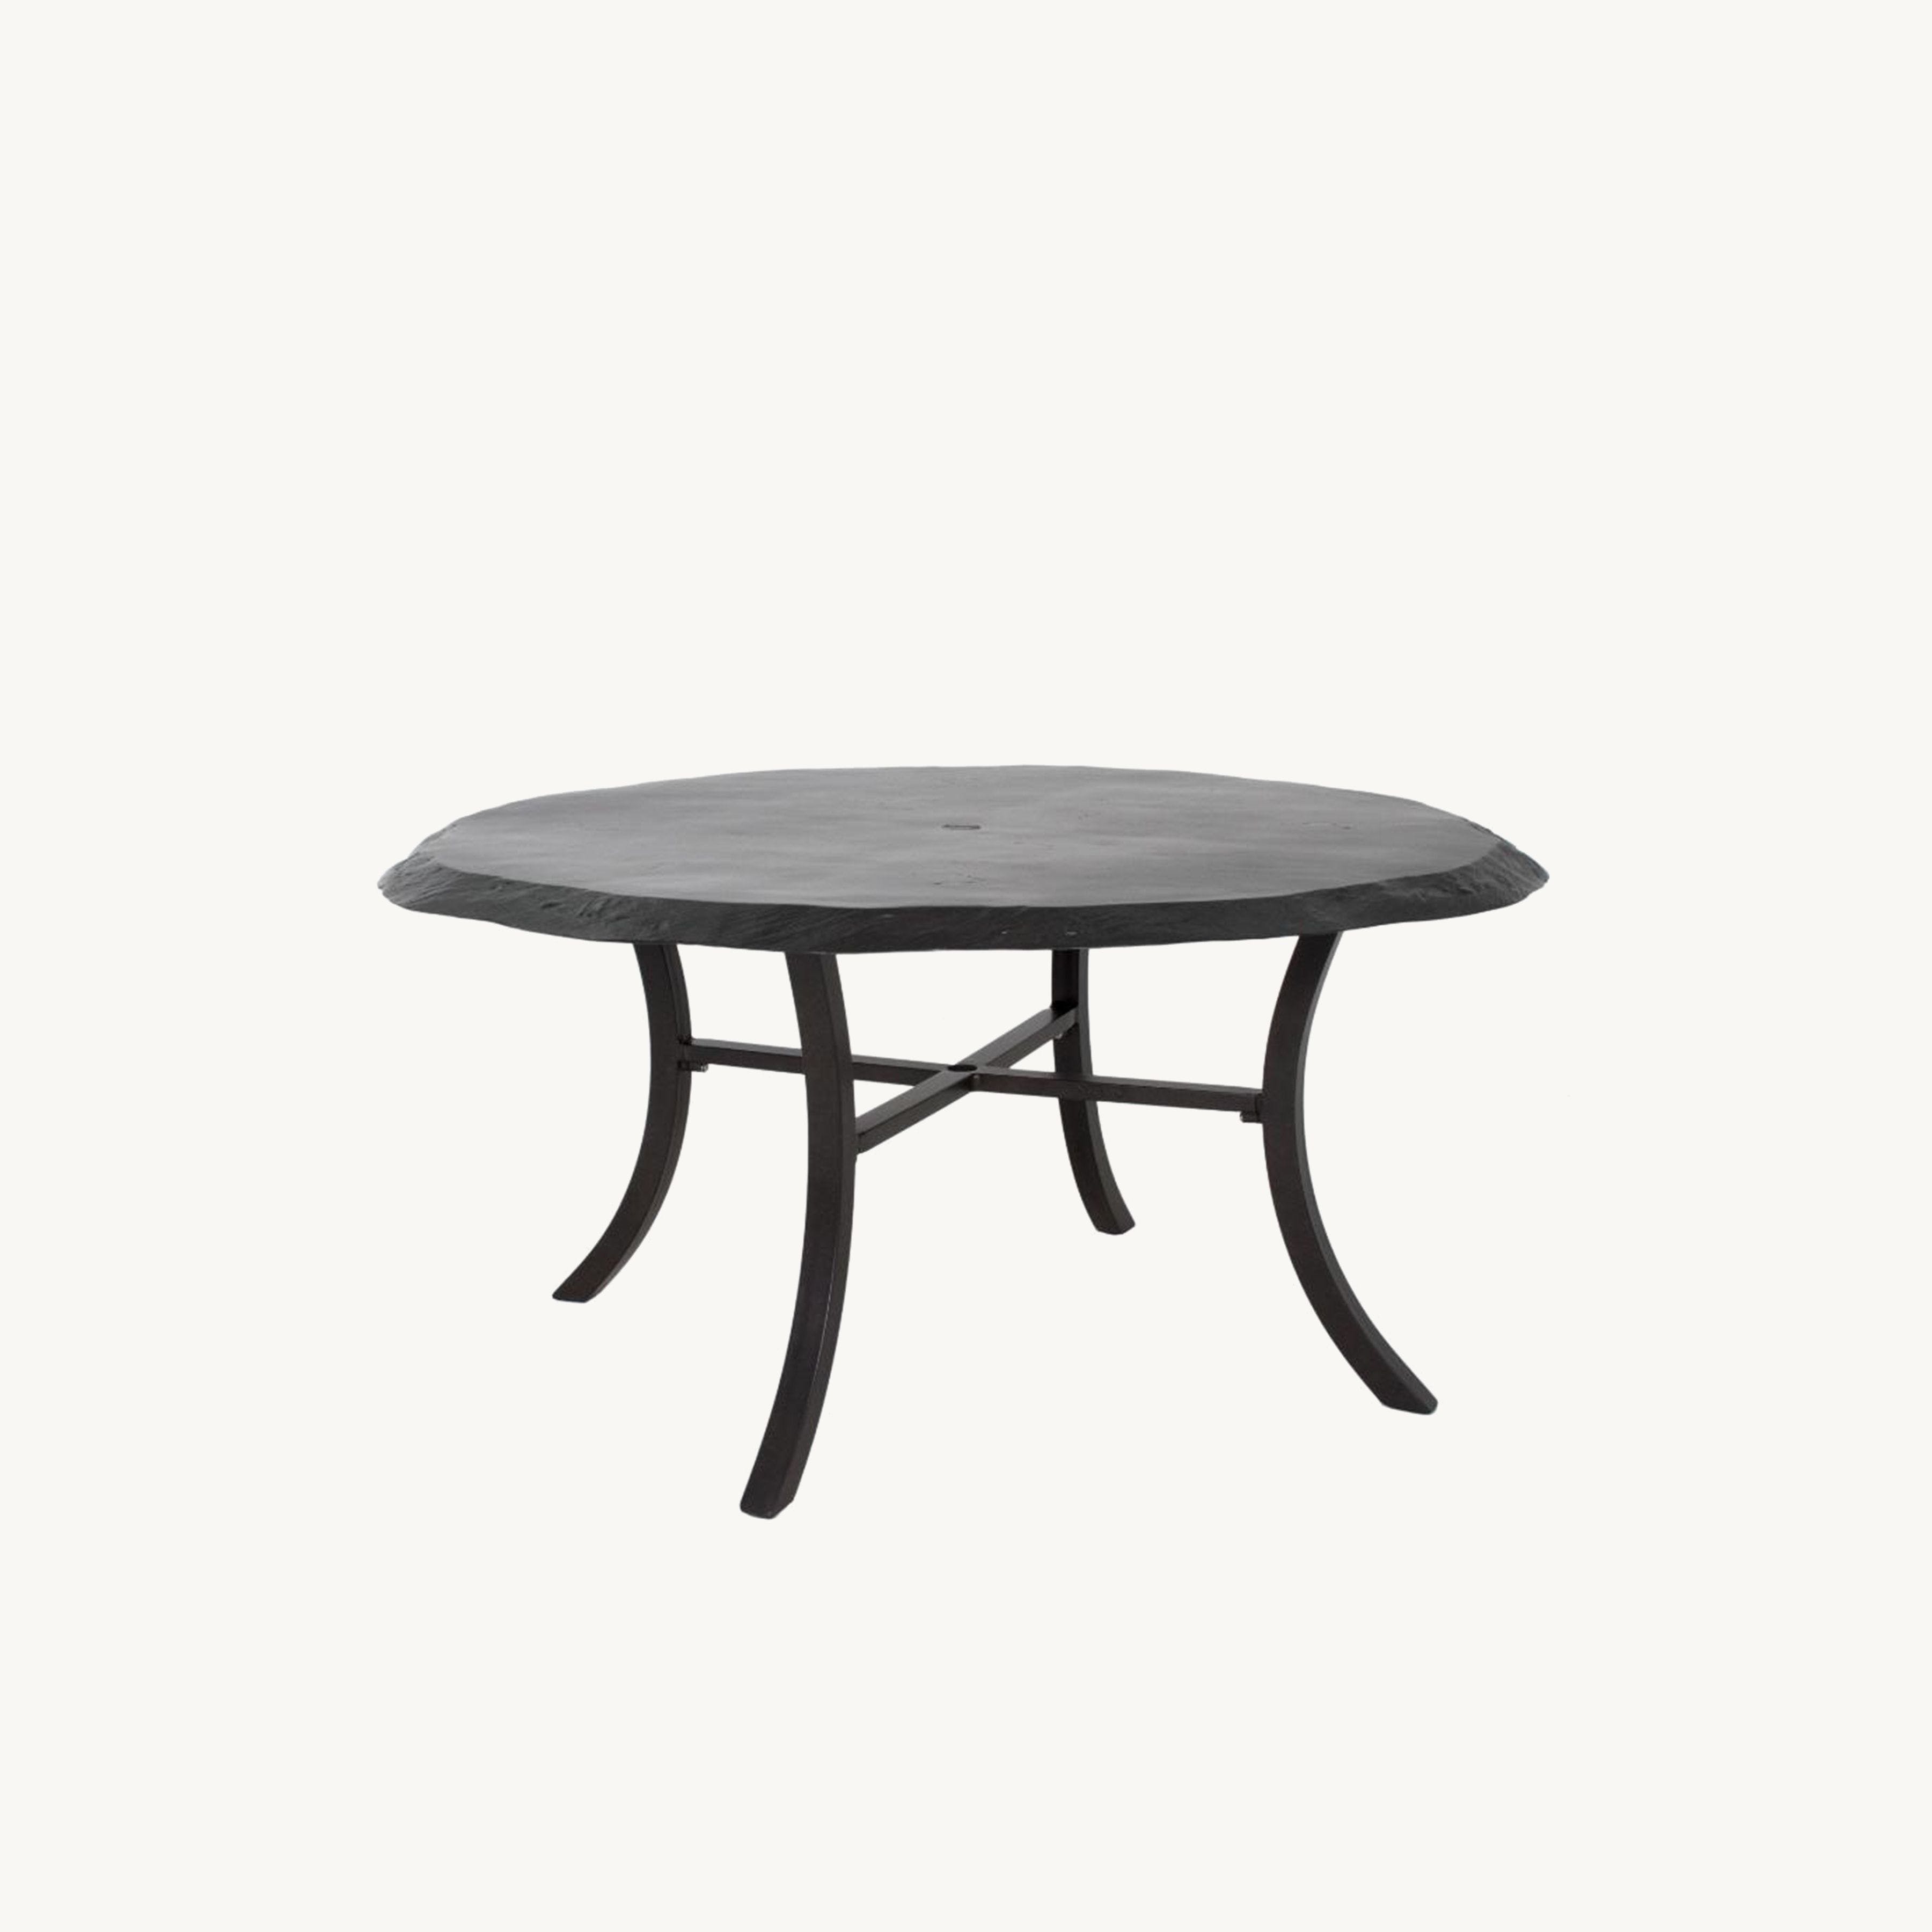 Bellagio Cushion Round Dining Table for 6 By Castelle